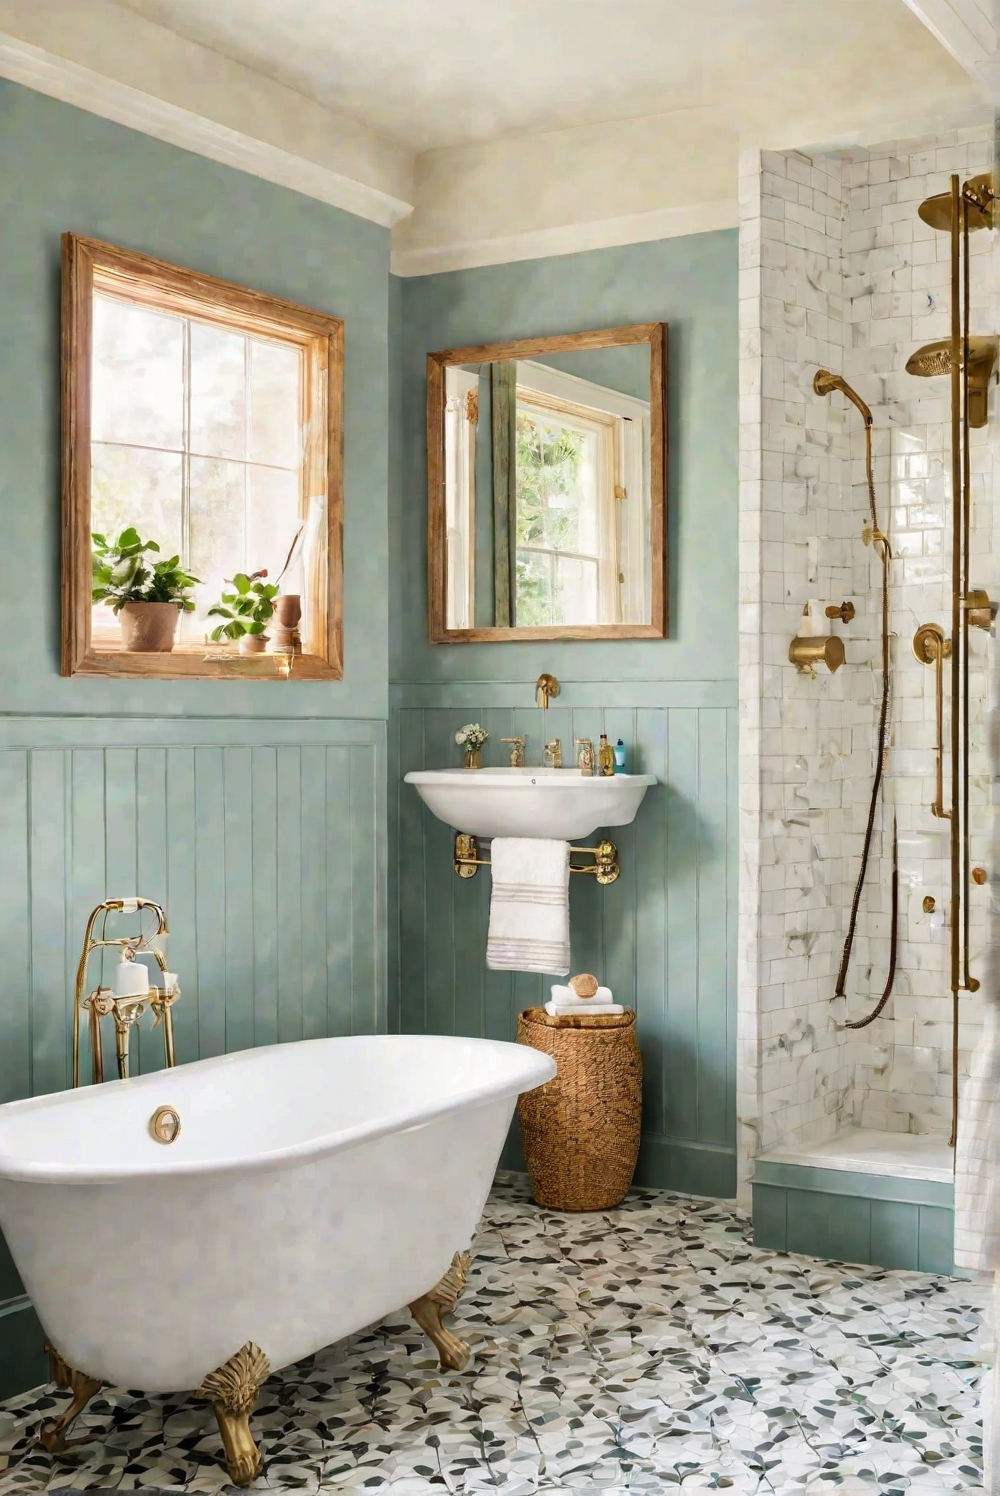 A Step-by-Step Guide to Finding Your Bathroom’s Perfect Paint Color